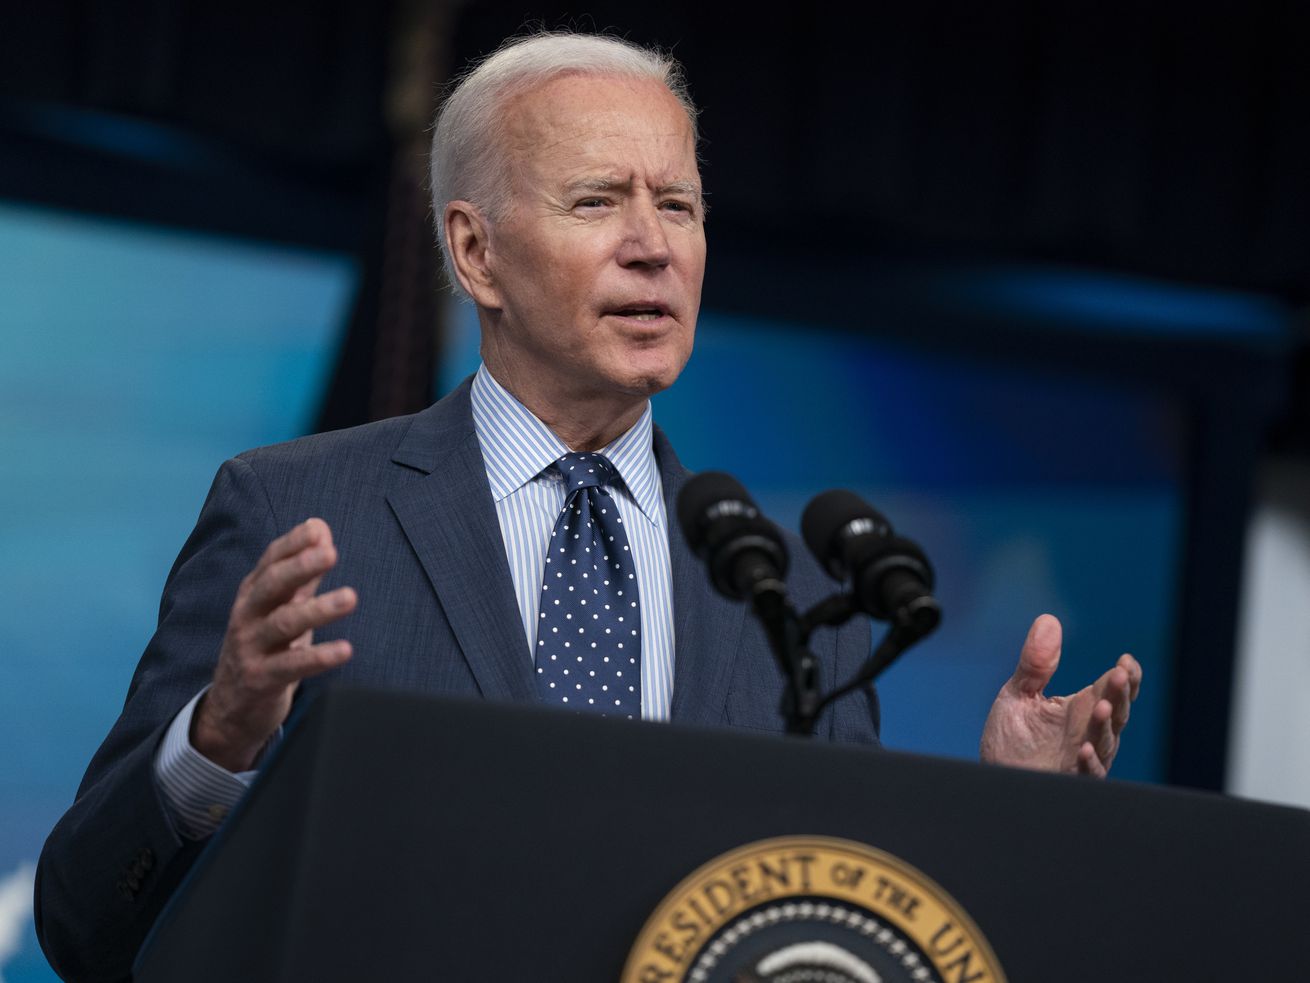 President Joe Biden speaks about the COVID-19 vaccination program, in the South Court Auditorium on the White House campus, Wednesday, June 2, 2021, in Washington.